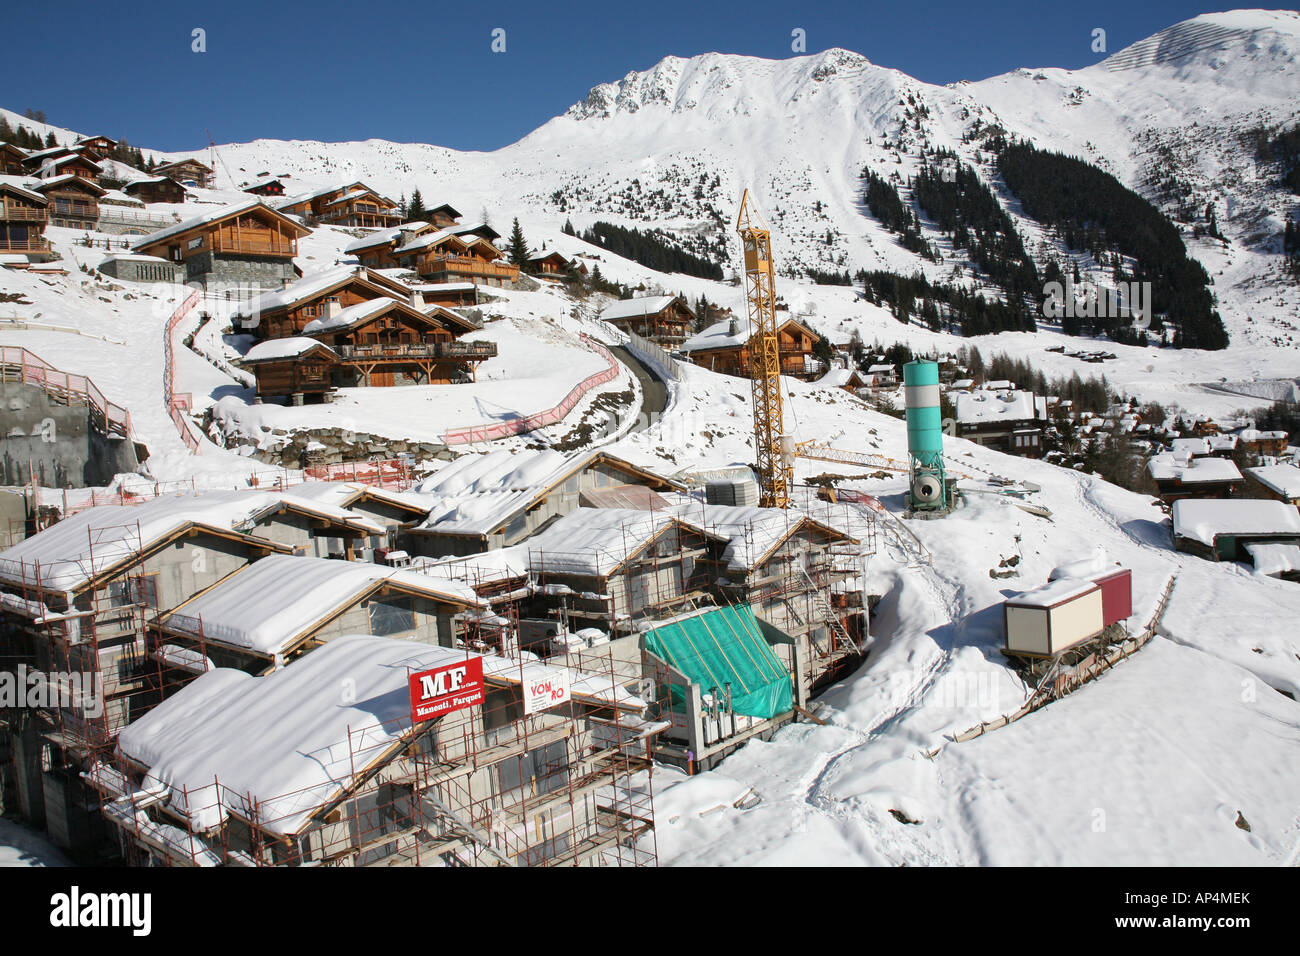 Construction of new chalets at Verbier Switzerland Stock Photo